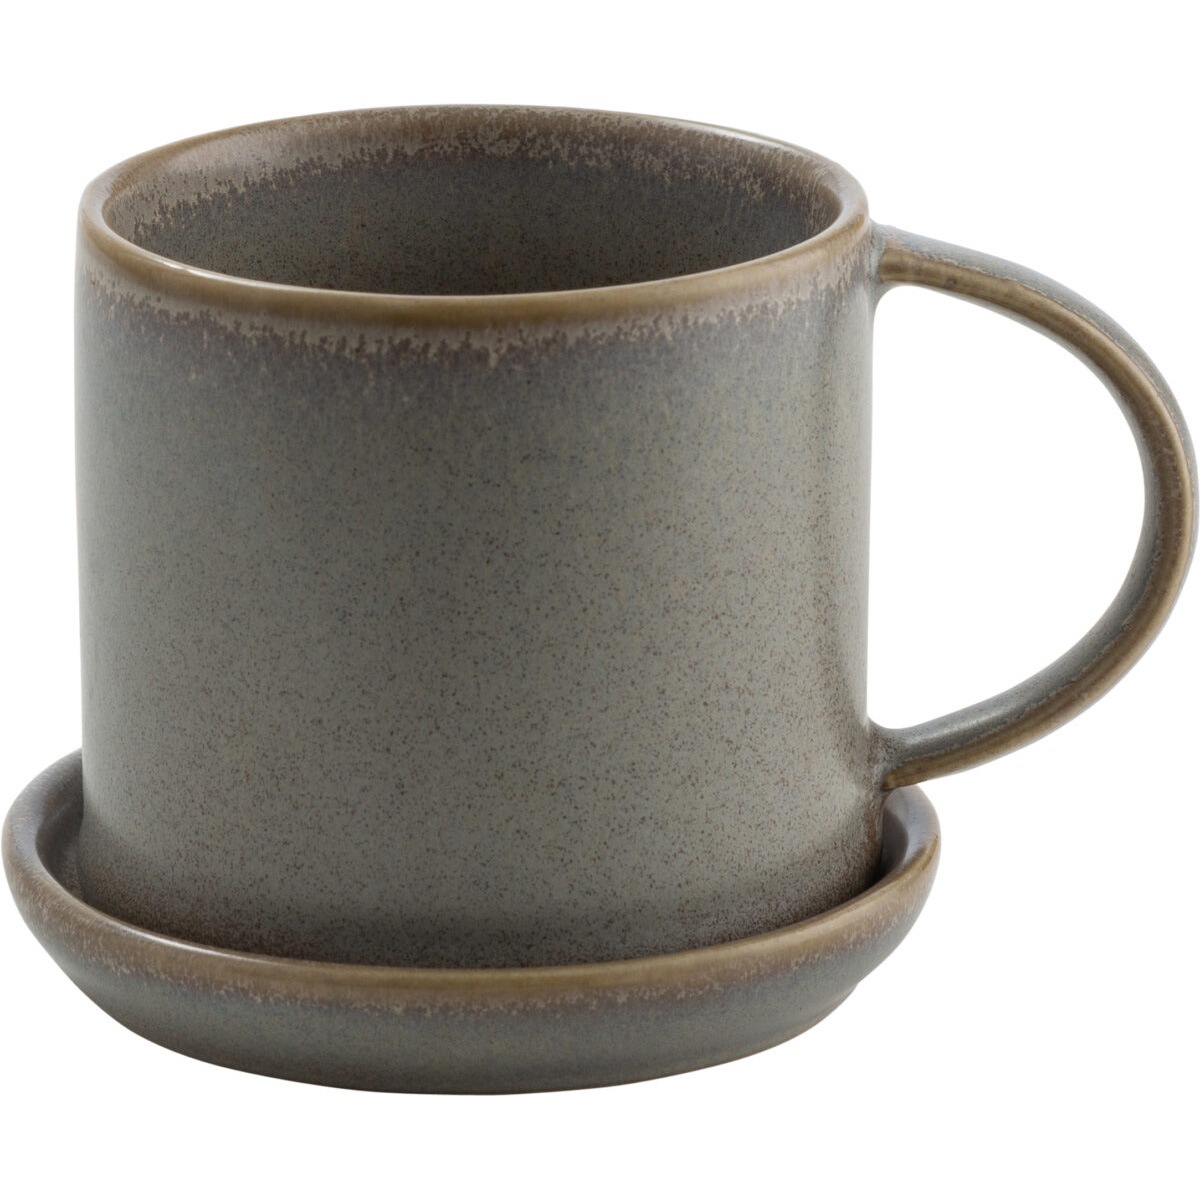 Cup With Saucer 7 cm, Grey